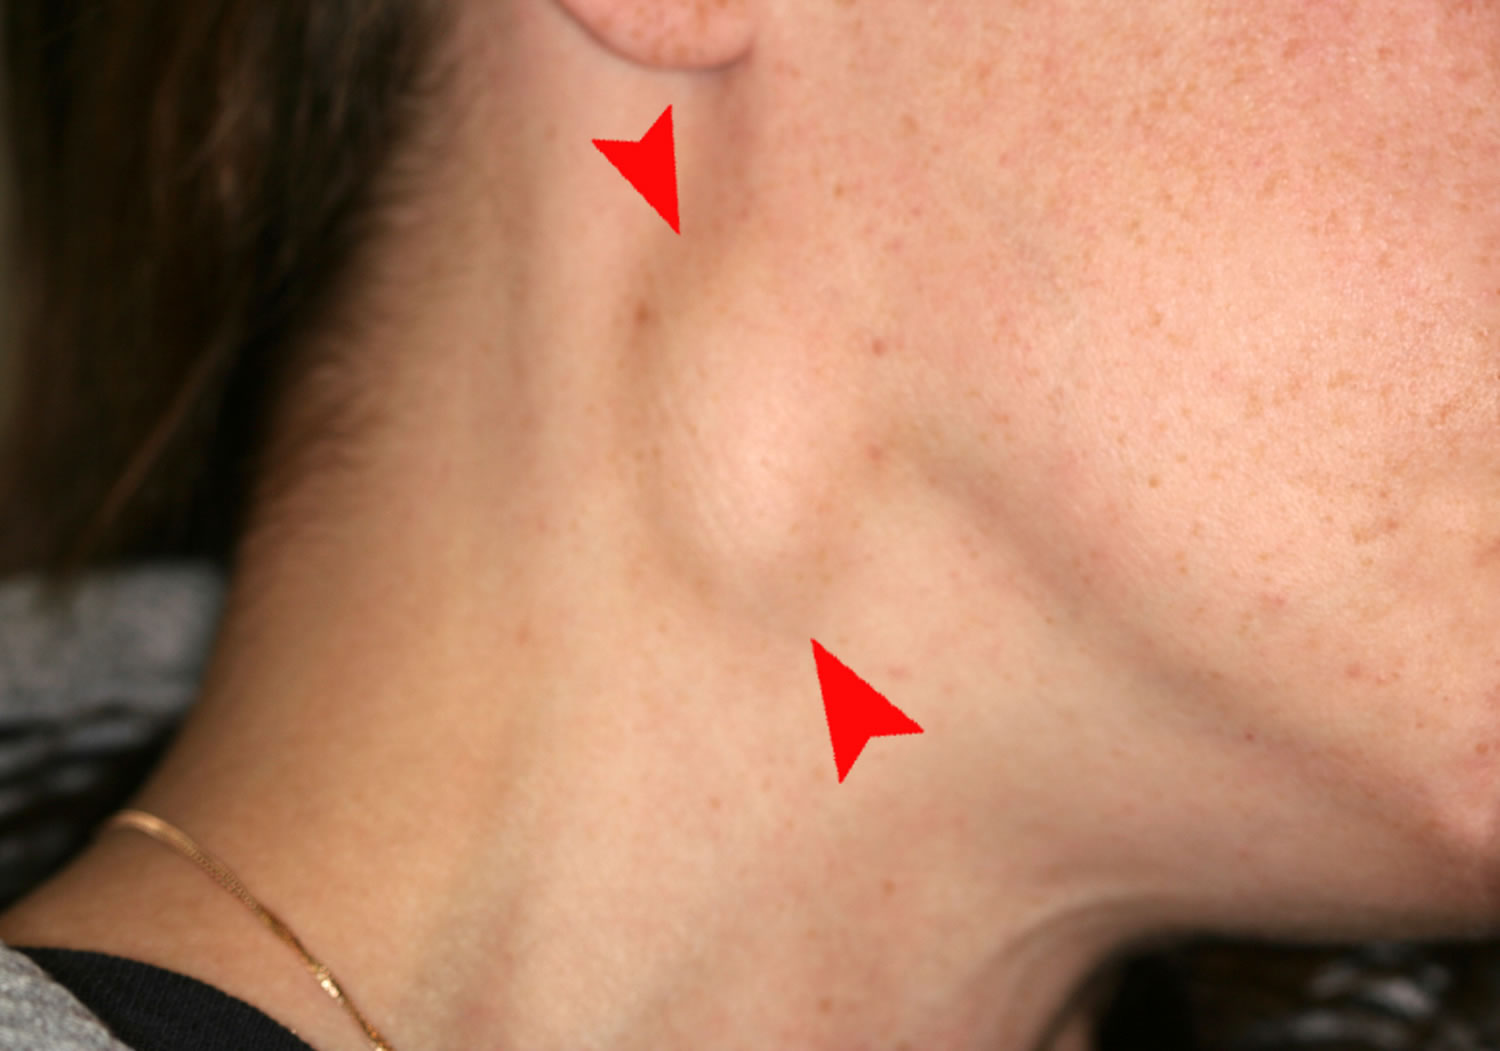 <p>= enlargement of the lymph nodes (&gt;1cm) from infection, allergy or neoplasm</p>